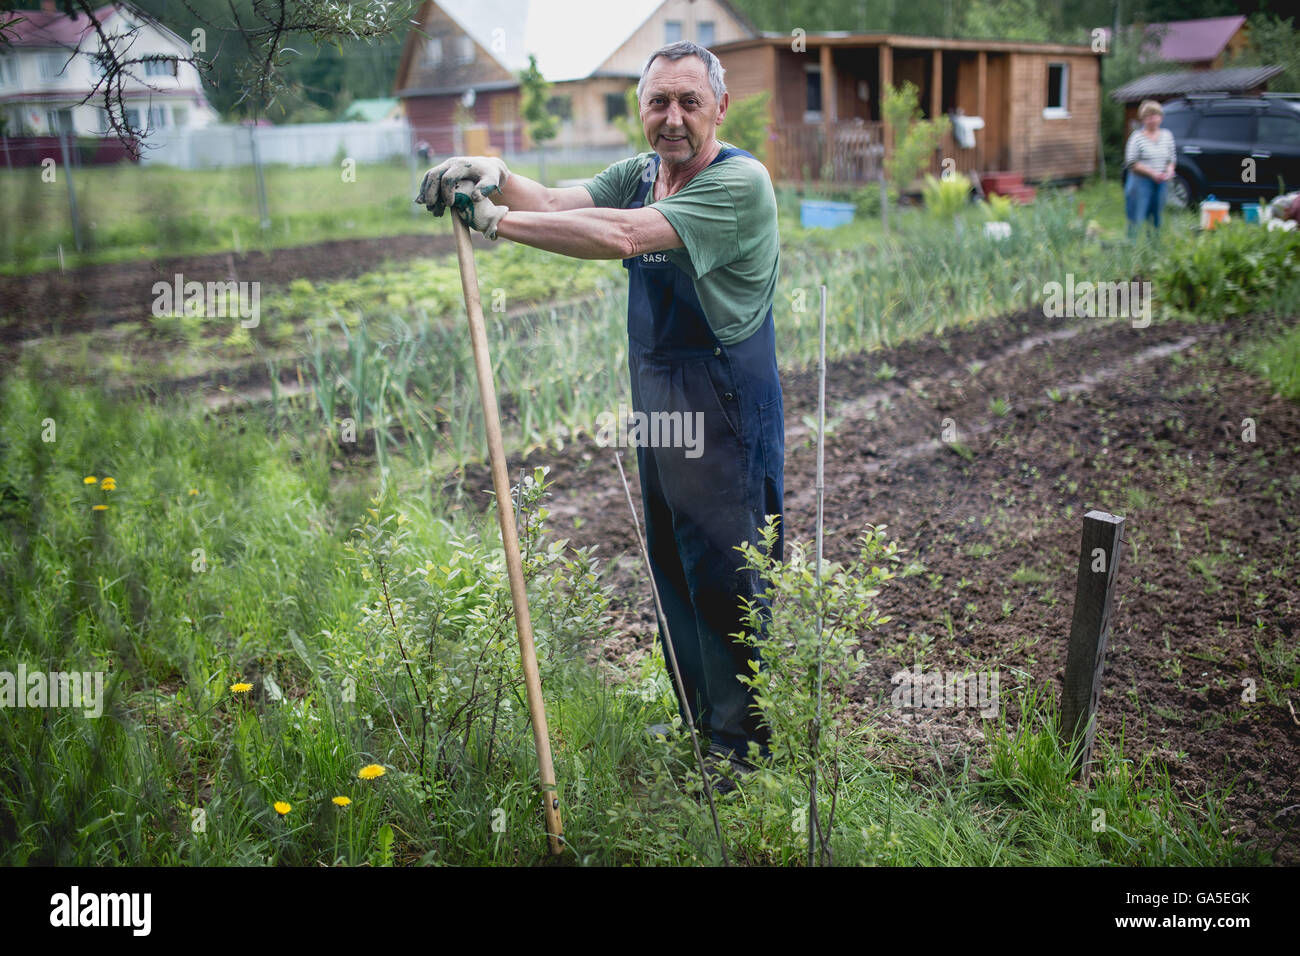 Tula, Russia. 28th May, 2016. Valentin works in his dacha in the environs of Tula, Russia, on May 28, 2016. Dacha is a traditional Russian country house with a yard for summer. Dachas used to be a place to unite families and co-workers who were given the land. Today they are changing---new buyers come and make dachas a villa to take rest from noisy urban sprawl and neighbours. © Evgeny Sinitsyn/Xinhua/Alamy Live News Stock Photo